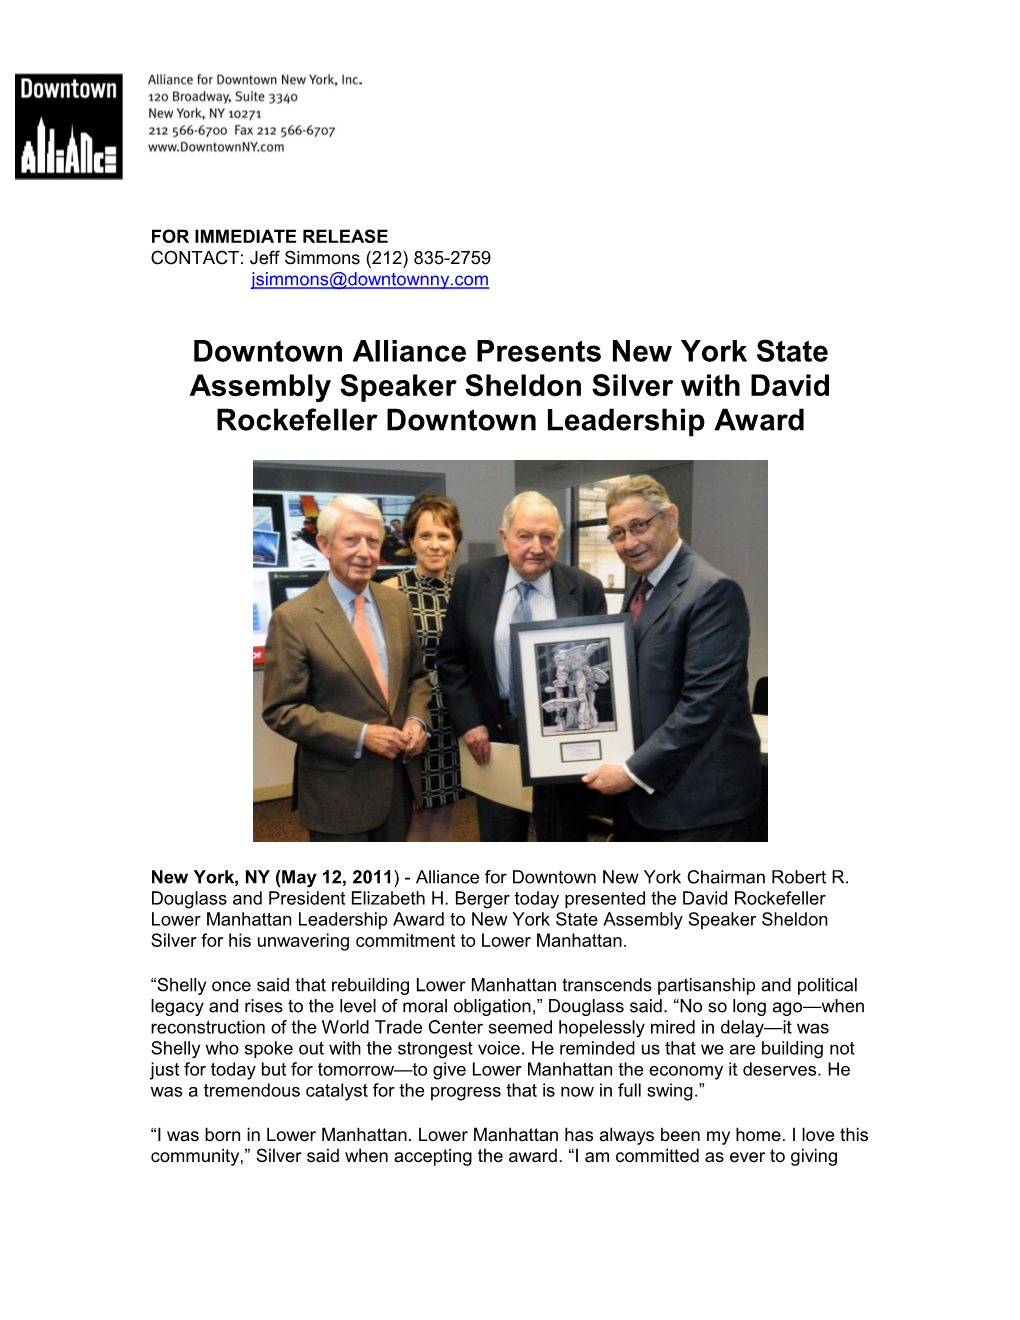 Downtown Alliance Presents New York State Assembly Speaker Sheldon Silver with David Rockefeller Downtown Leadership Award